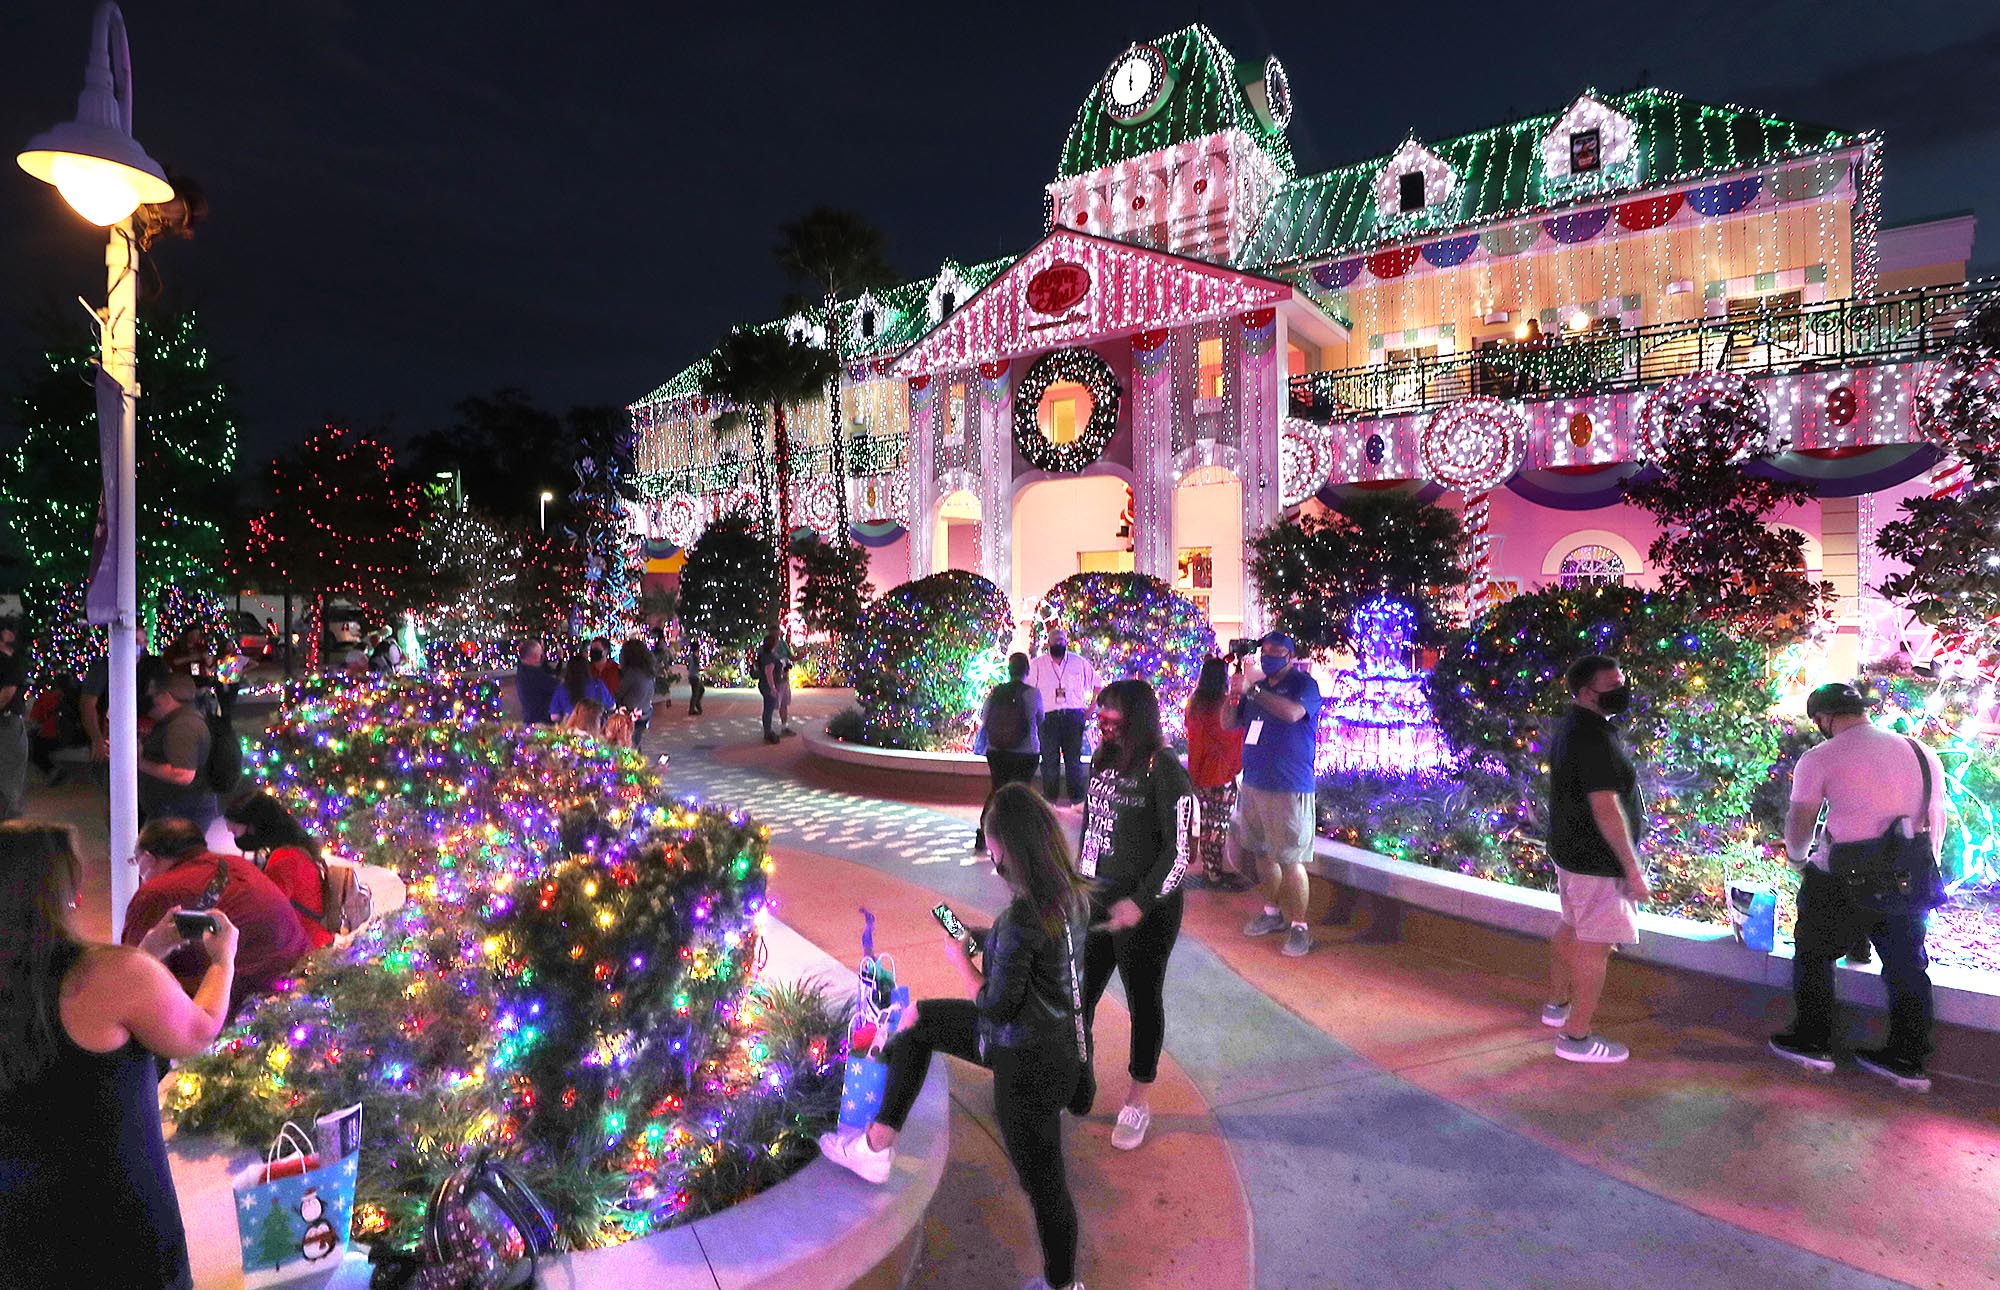 https://www.orlandosentinel.com/travel/attractions/the-daily-disney/os-et-give-kids-world-village-holiday-lights-preview-20201111-q4uq24xqcrayblh7r6xtmqa22q-story.html